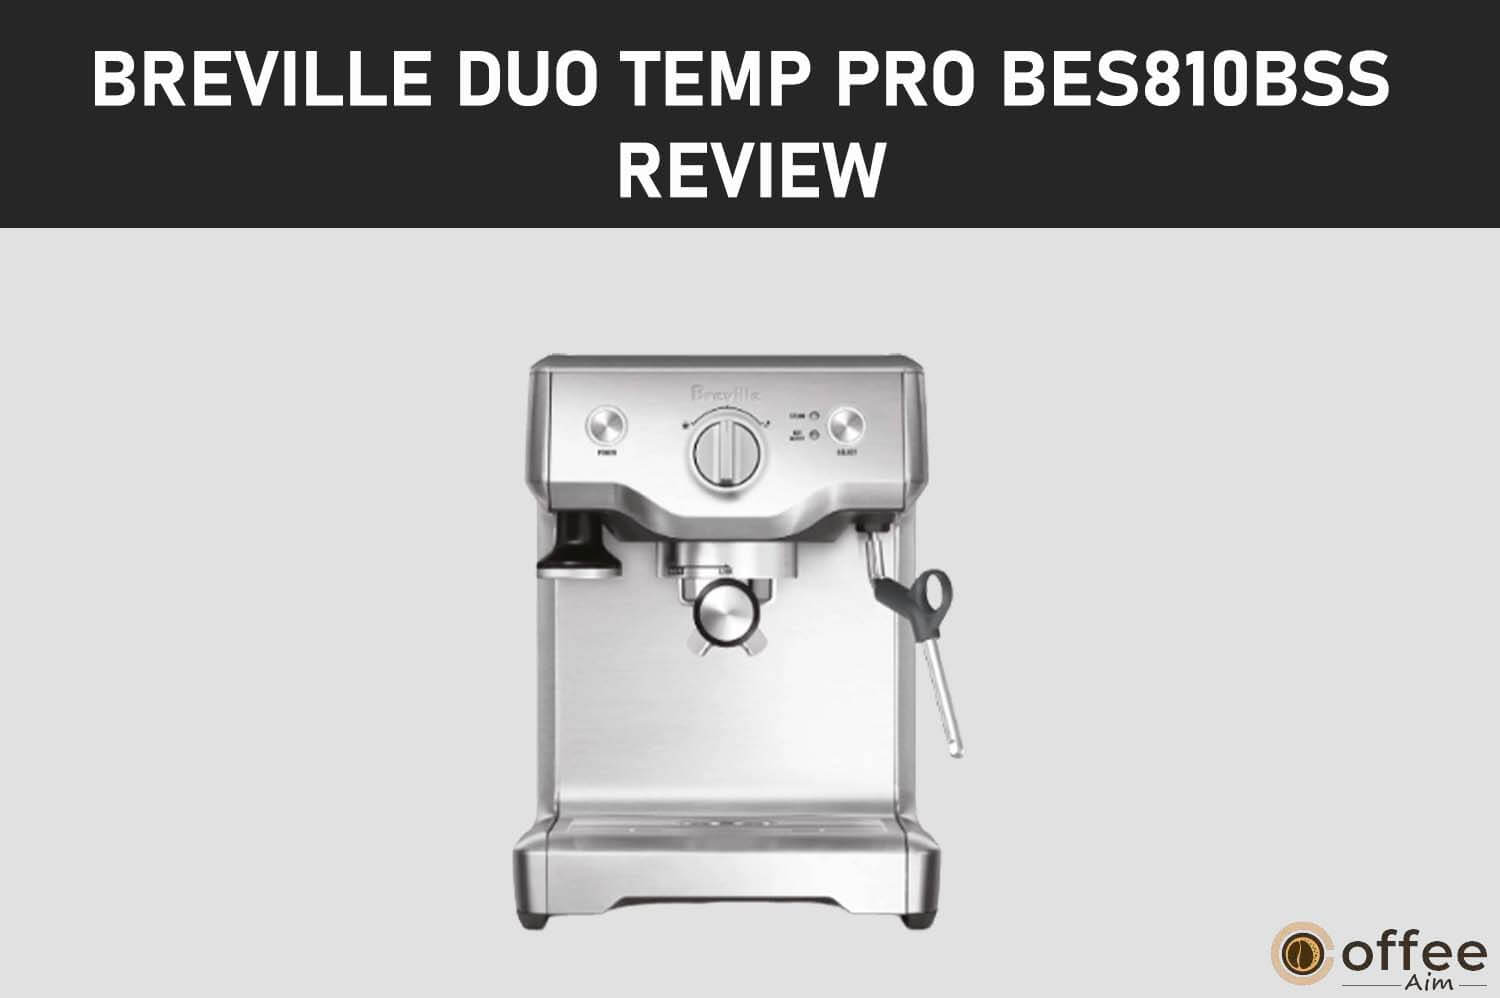 Featured image for the article "Breville Duo Temp Pro BES810BSS Review"